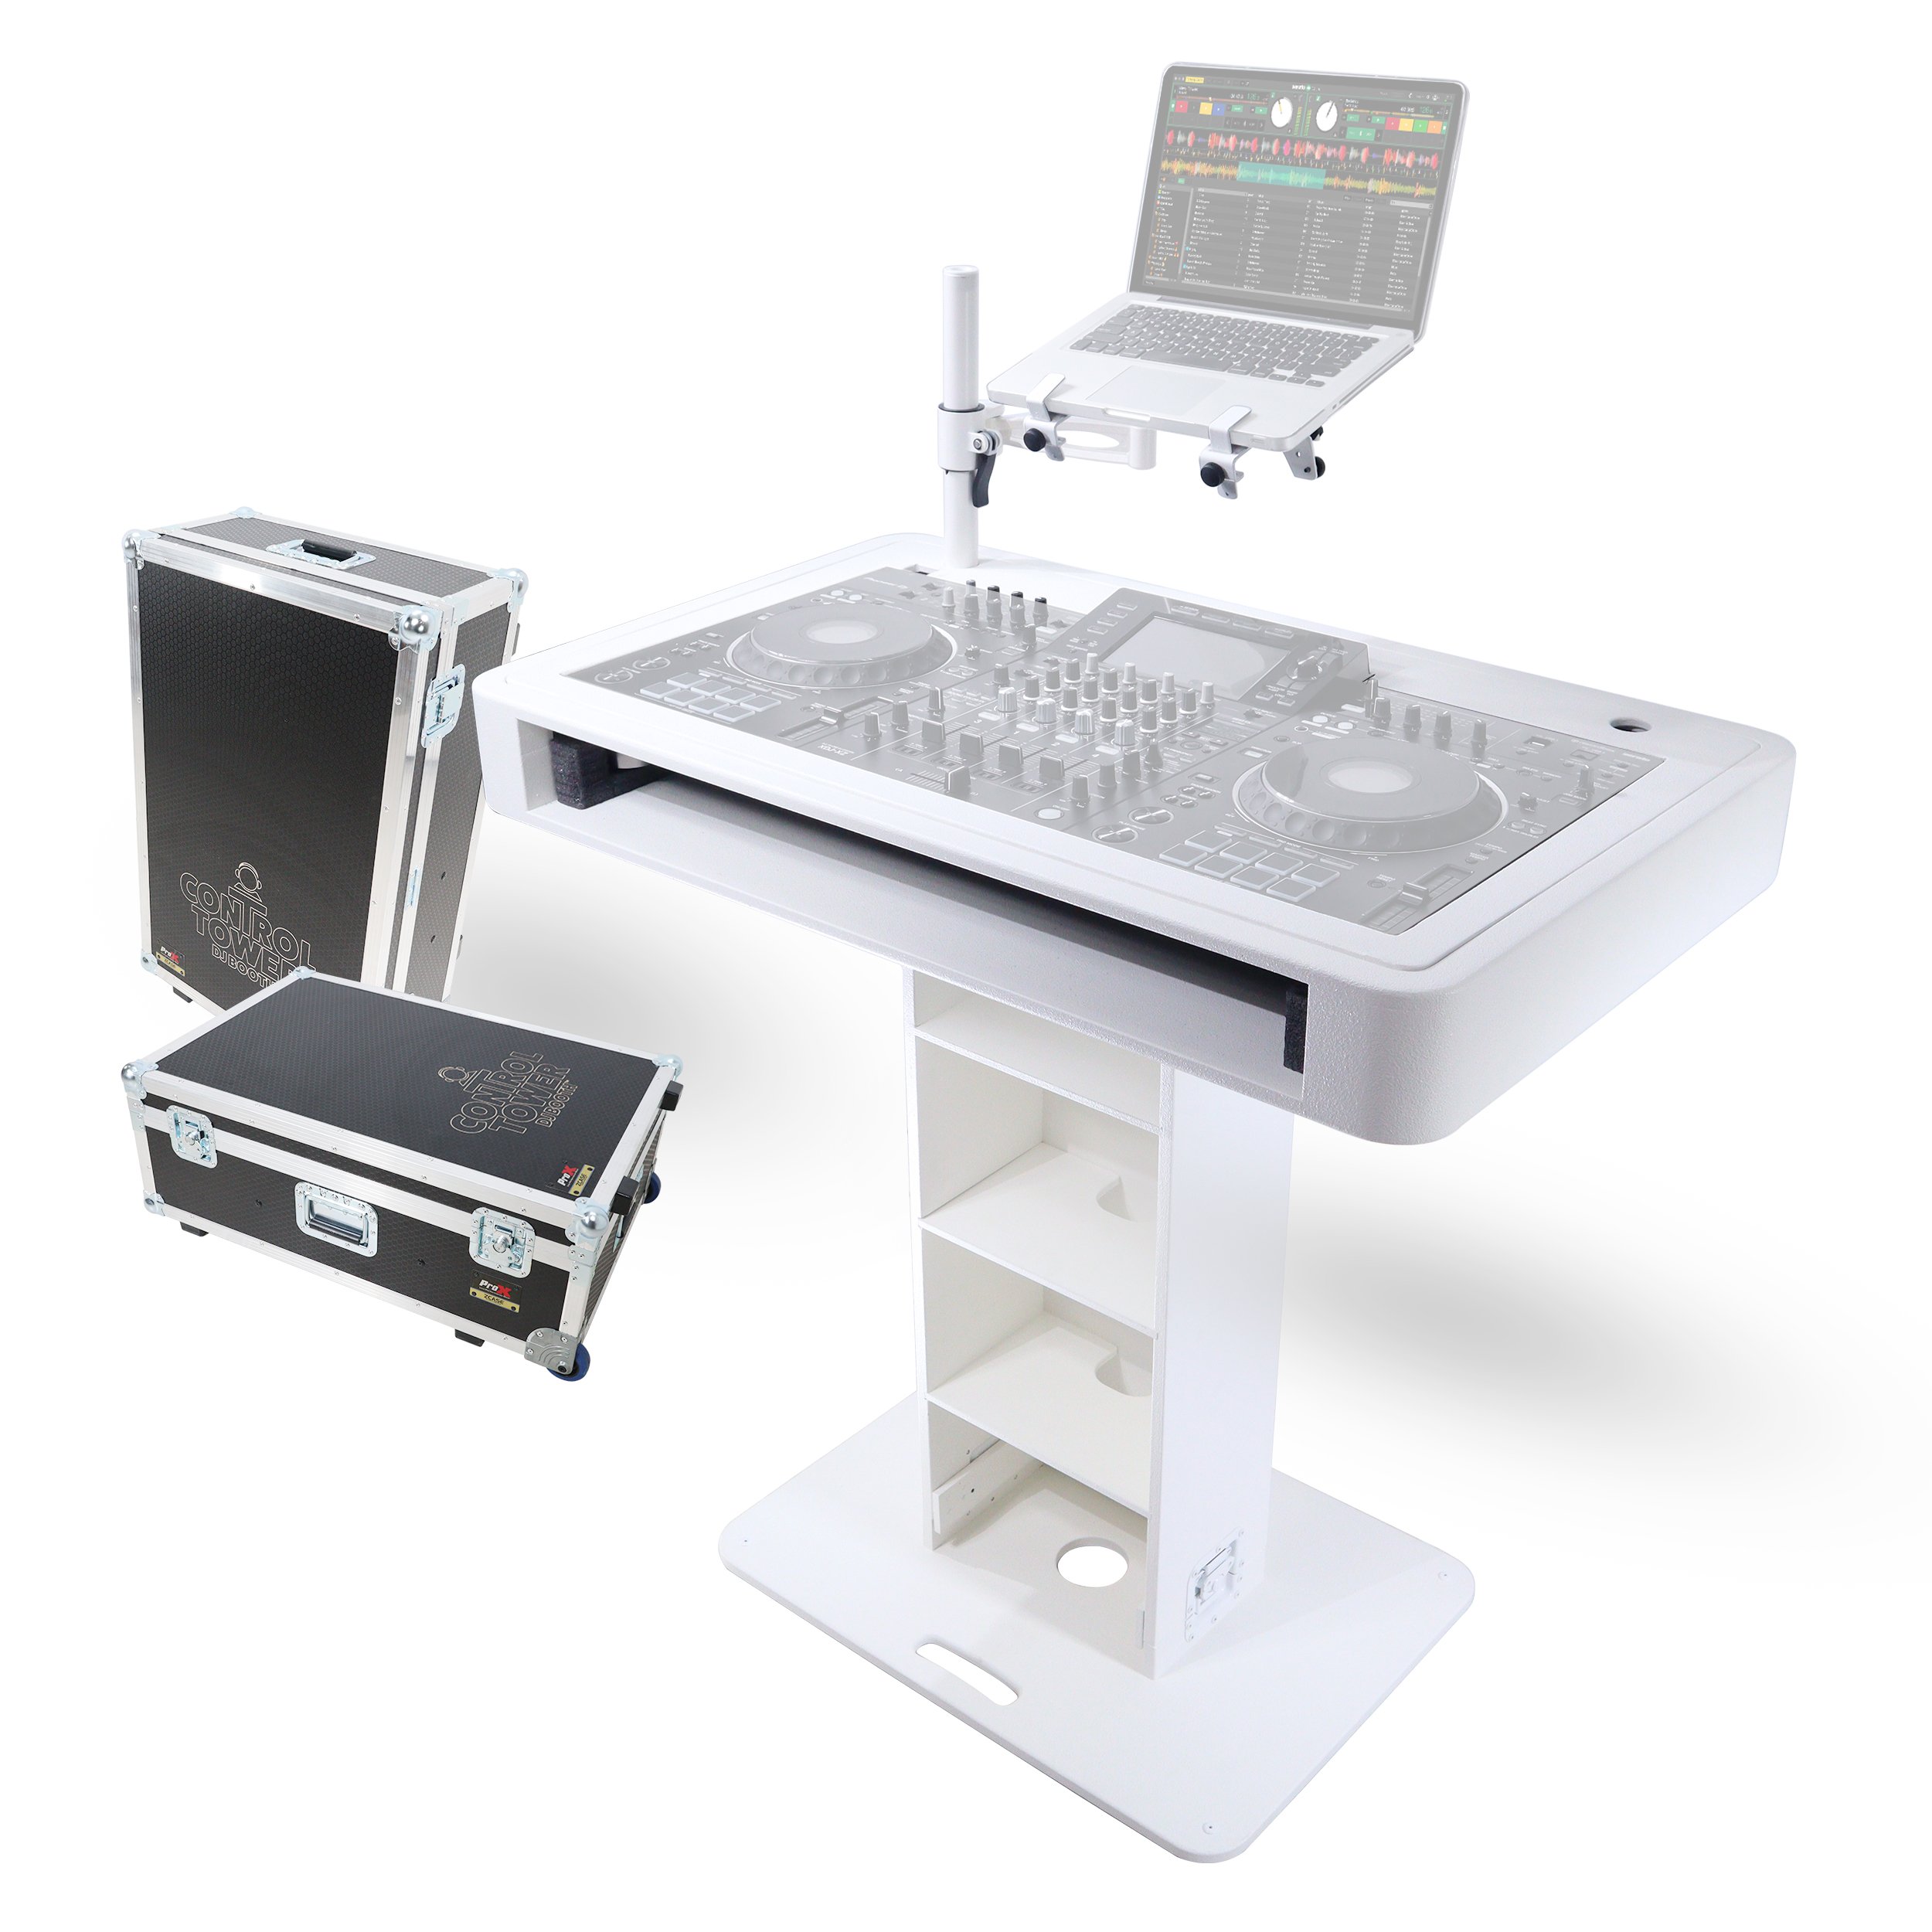 prox-xzf-djct-w-case--white-control-tower-dj-booth-w--laptop-stand-and-flight-cases.jpg